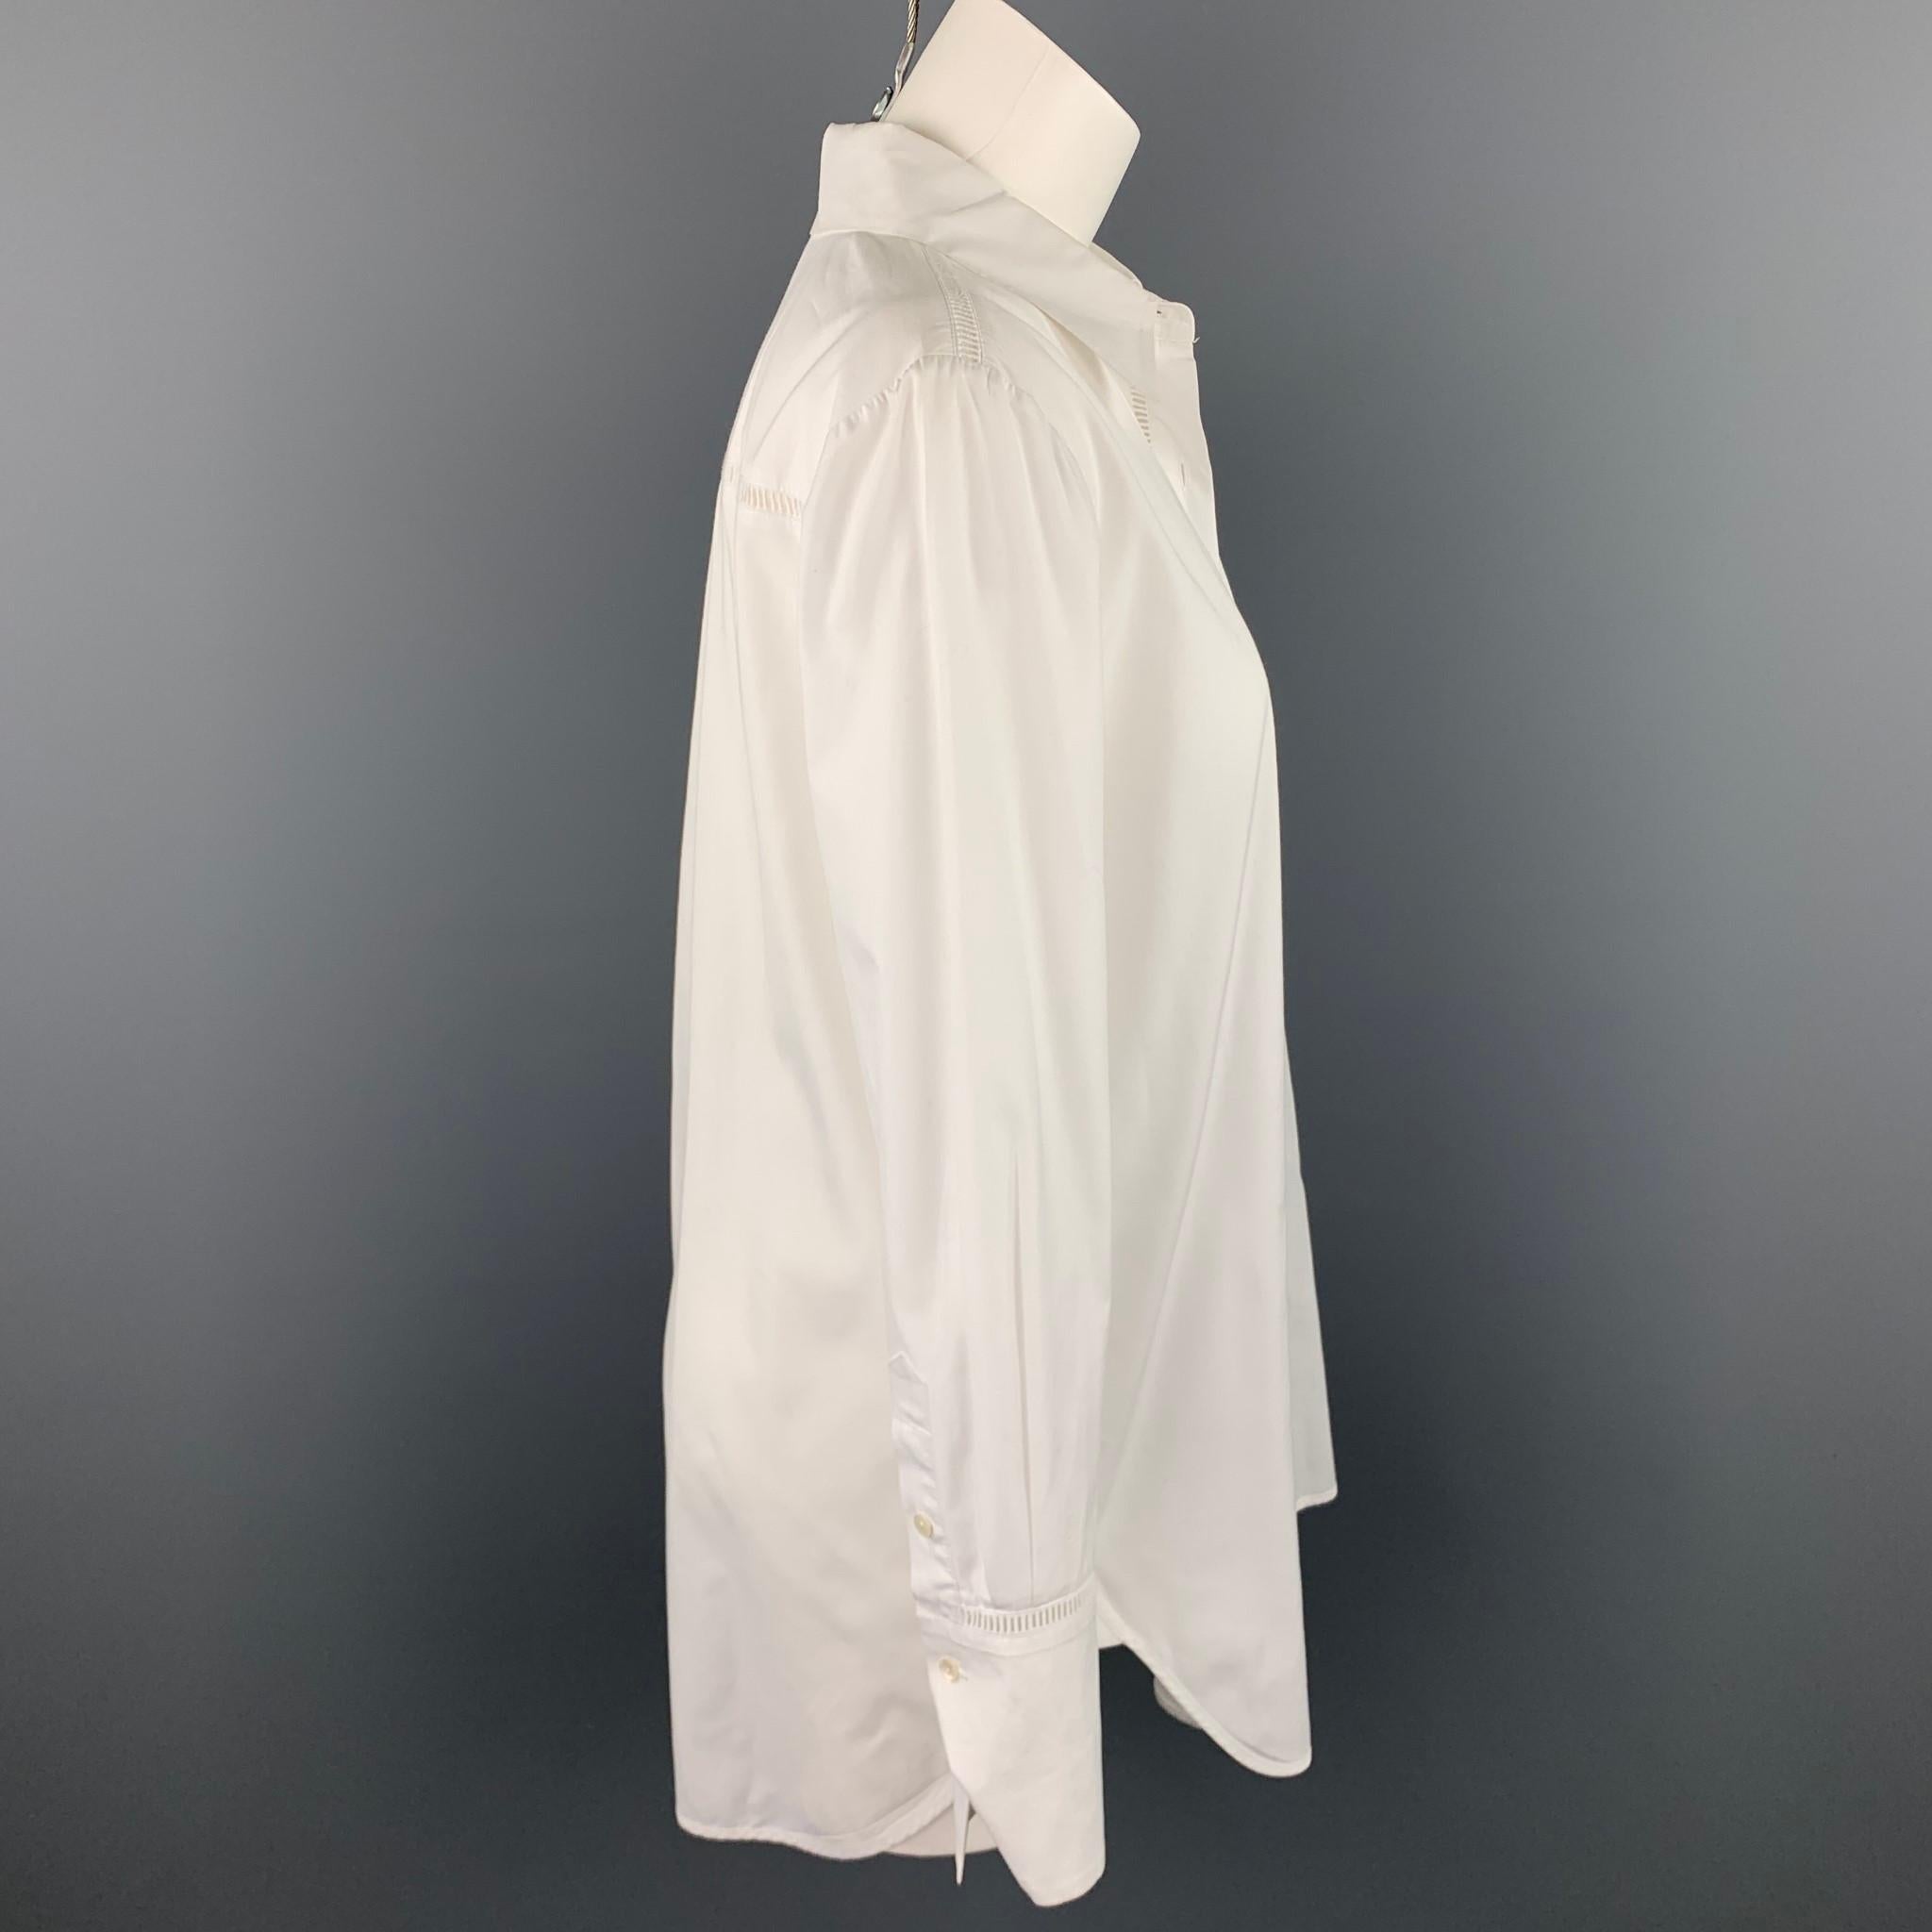 VINCE blouse comes in a white poplin cotton with eyelet details featuring a spread collar and a buttoned closure. 

Very Good Pre-Owned Condition.
Marked: M

Measurements:

Shoulder: 16 in. 
Bust: 42 in. 
Sleeve: 24.5 in. 
Length: 31.5 in. 

SKU: